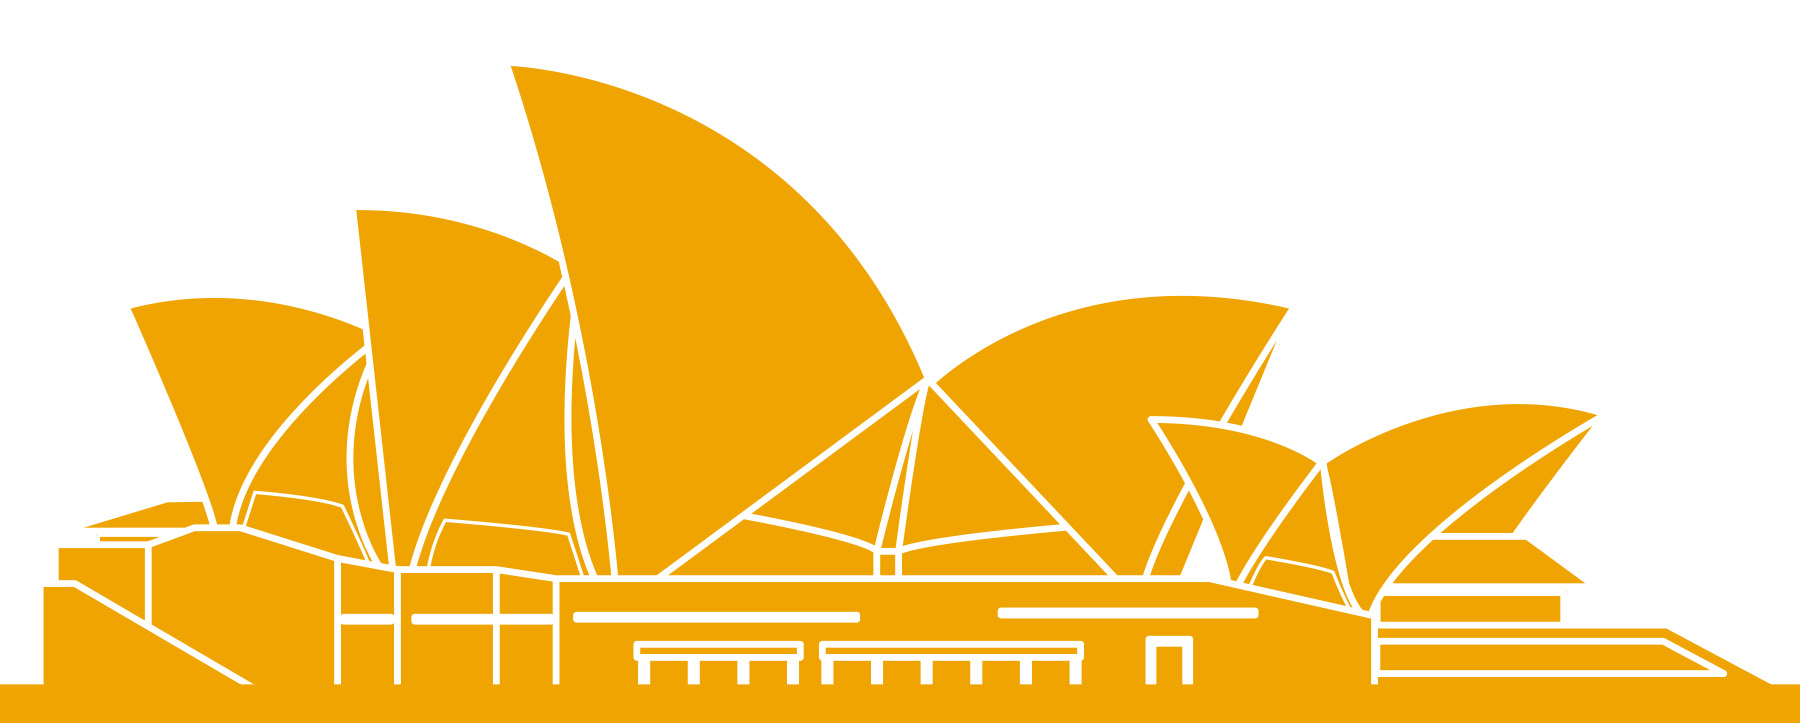 Illustration of the Sydney Opera House depicting its multipoint roof. 